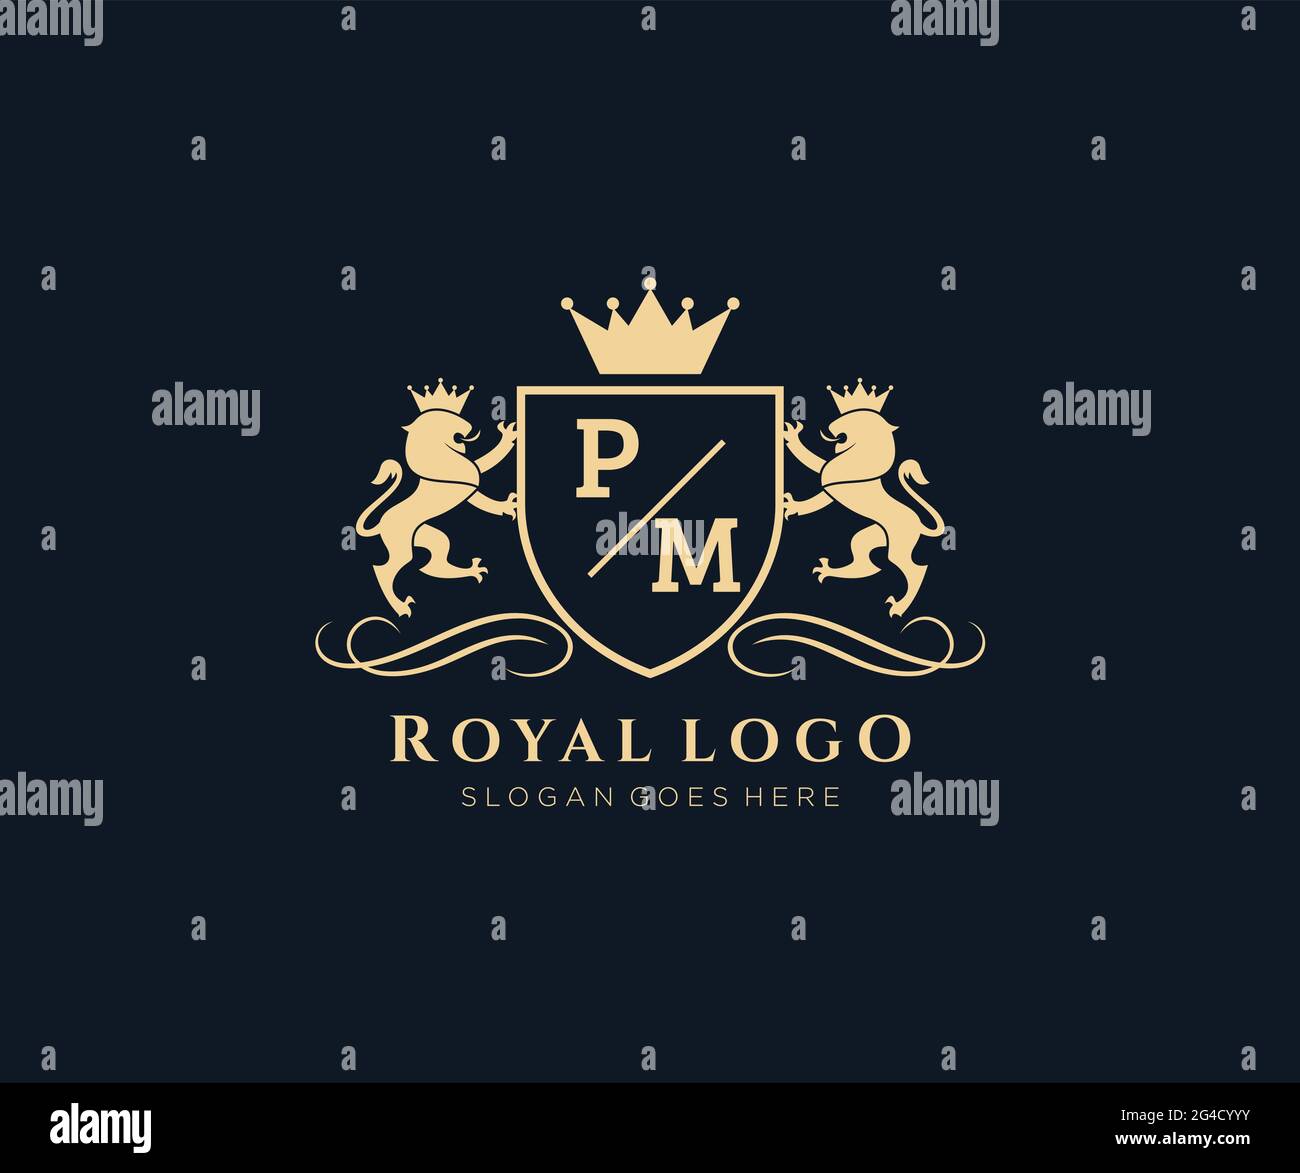 PM Letter Lion Royal Luxury Heraldic,Crest Logo template in vector art for Restaurant, Royalty, Boutique, Cafe, Hotel, Heraldic, Jewelry, Fashion and Stock Vector